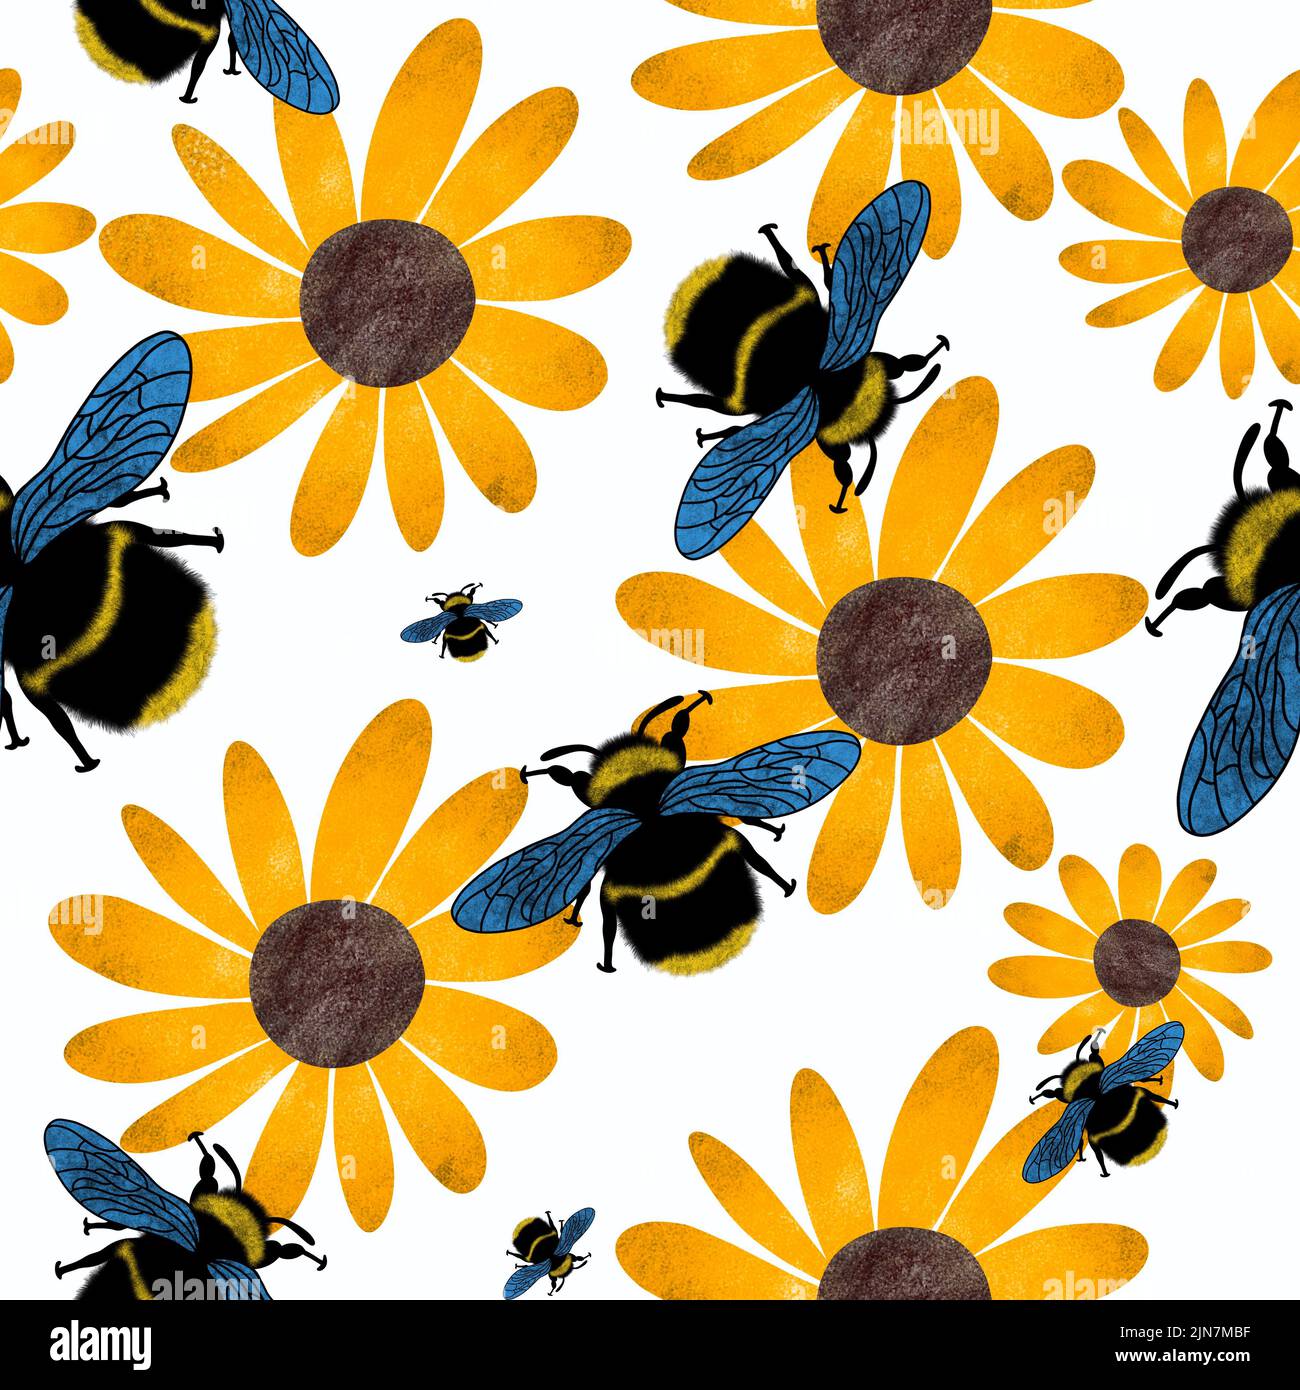 Sunflower and Floral Print Wrapping Paper